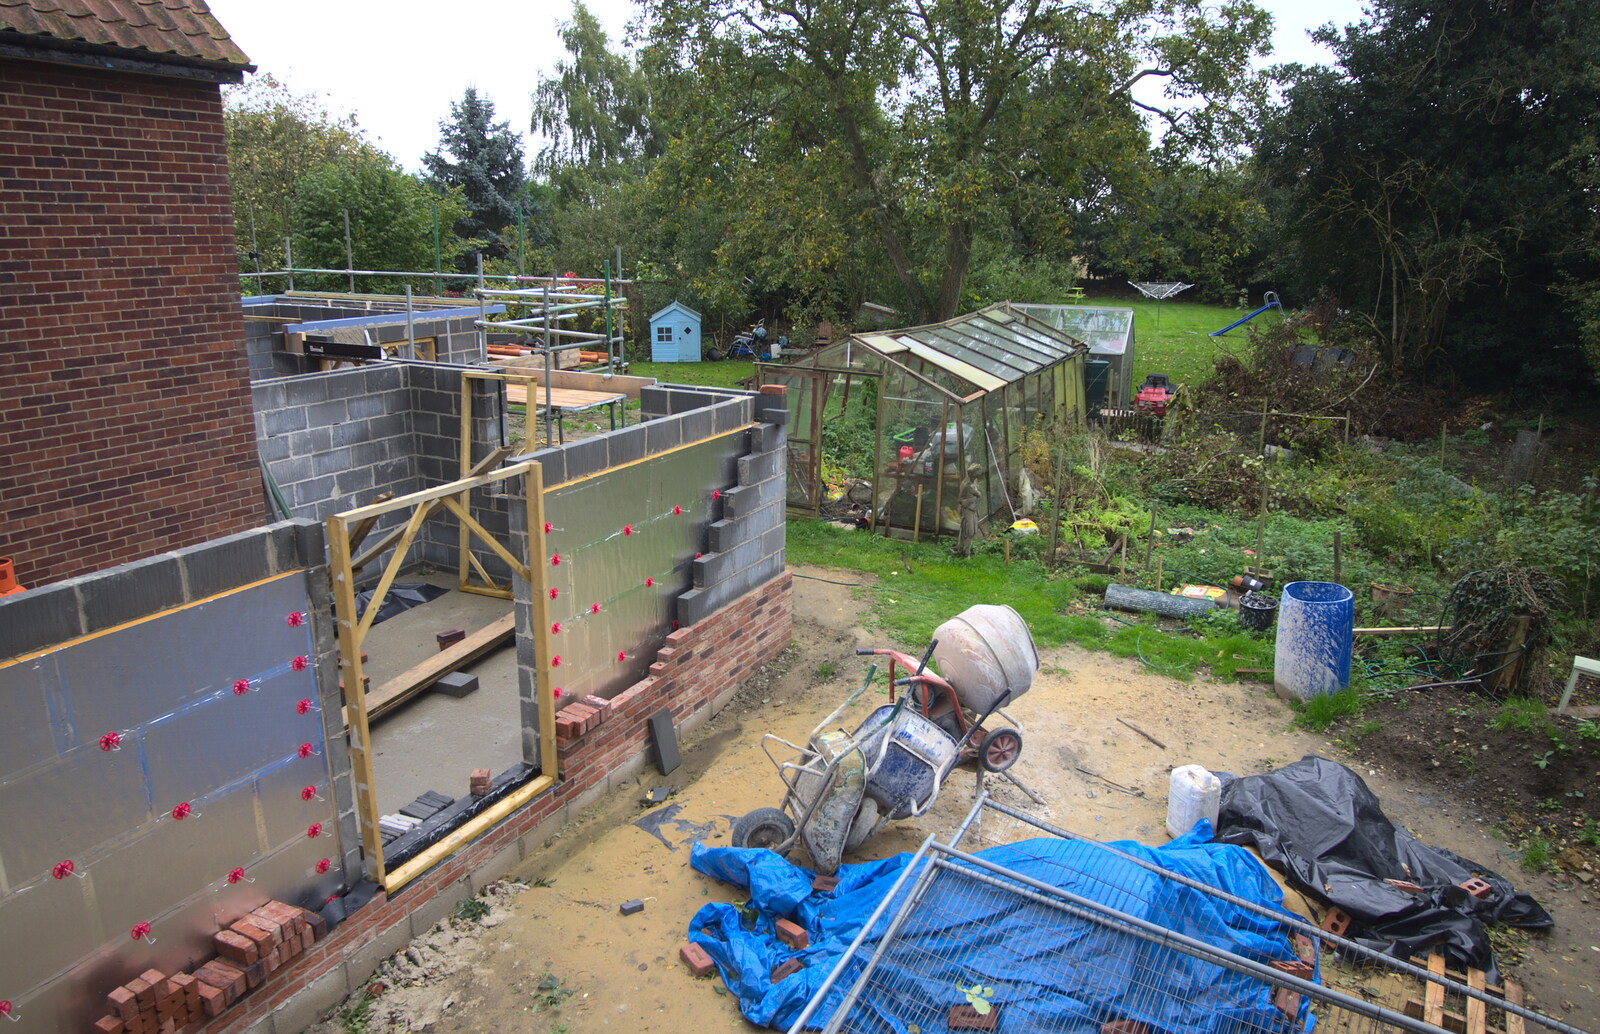 A building site from A Building Site Update, Brome, Suffolk - 13th October 2013